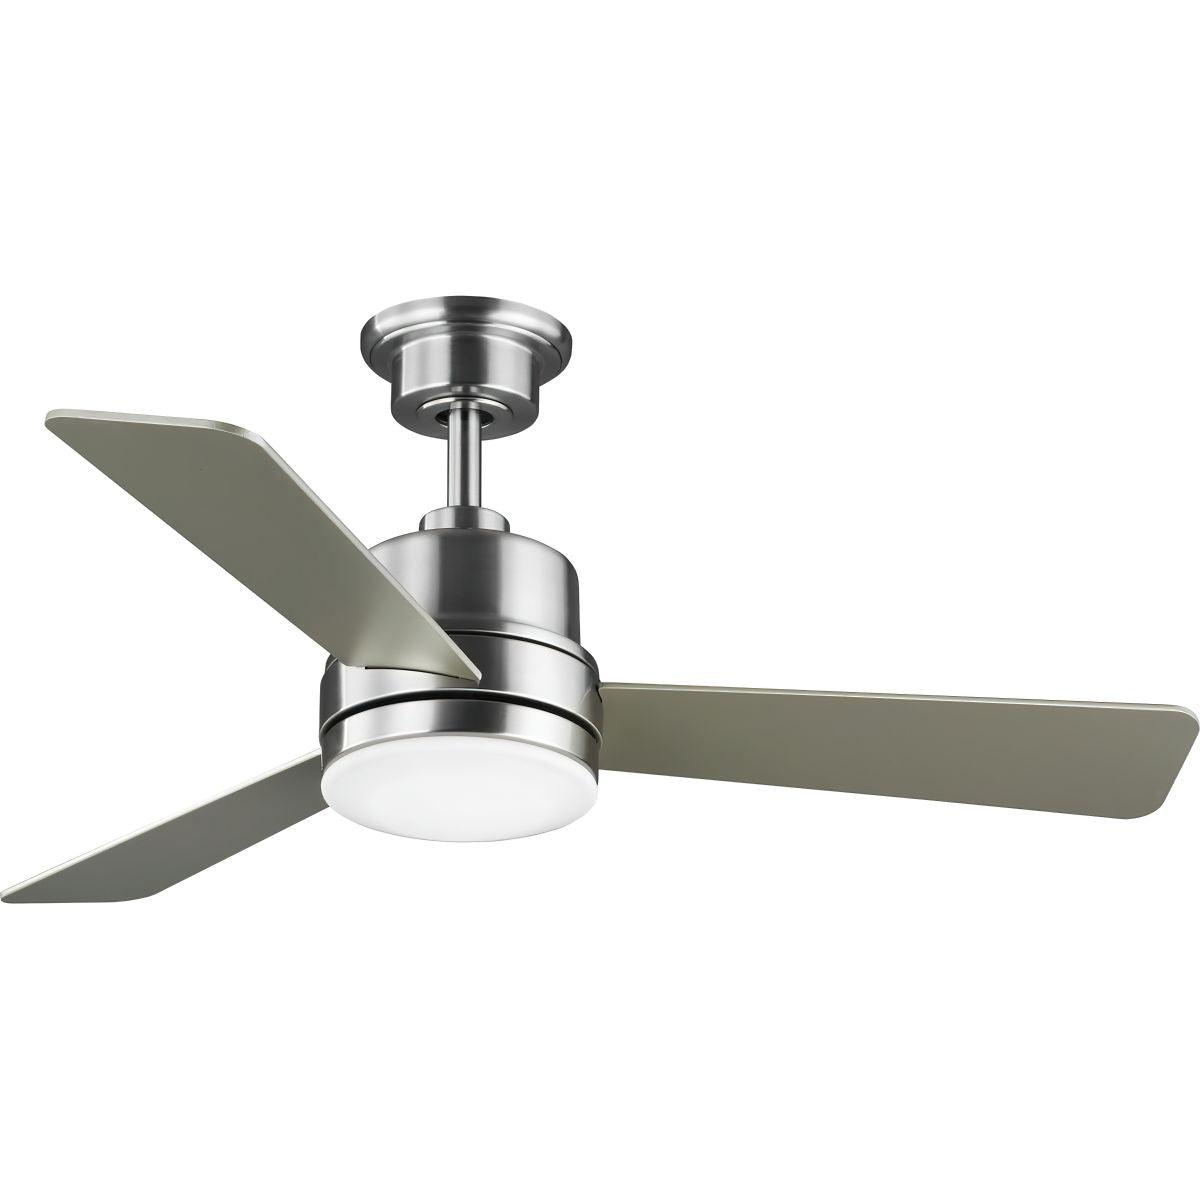 Trevina II 44 Inch Modern Ceiling Fan With Light, Wall Control Included - Bees Lighting